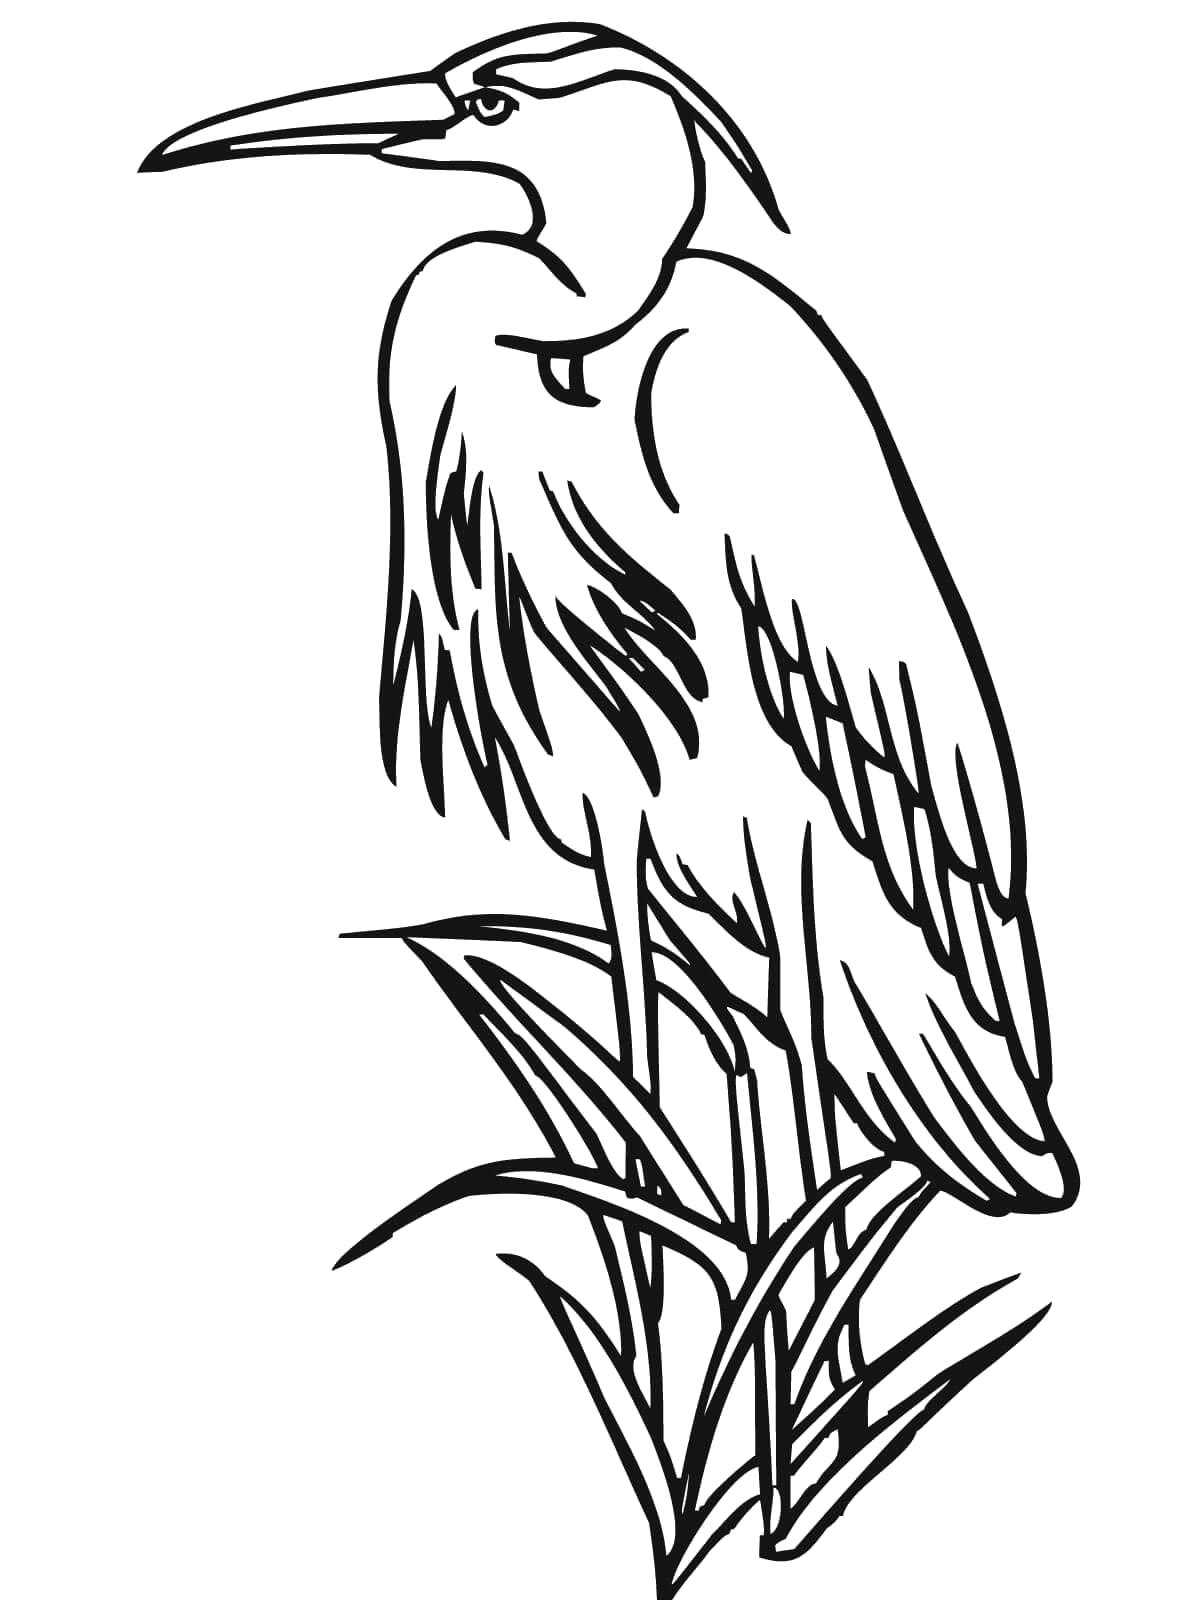 Coloring Heron in the grass. Category The contours for cutting out the birds. Tags:  Heron, grass.